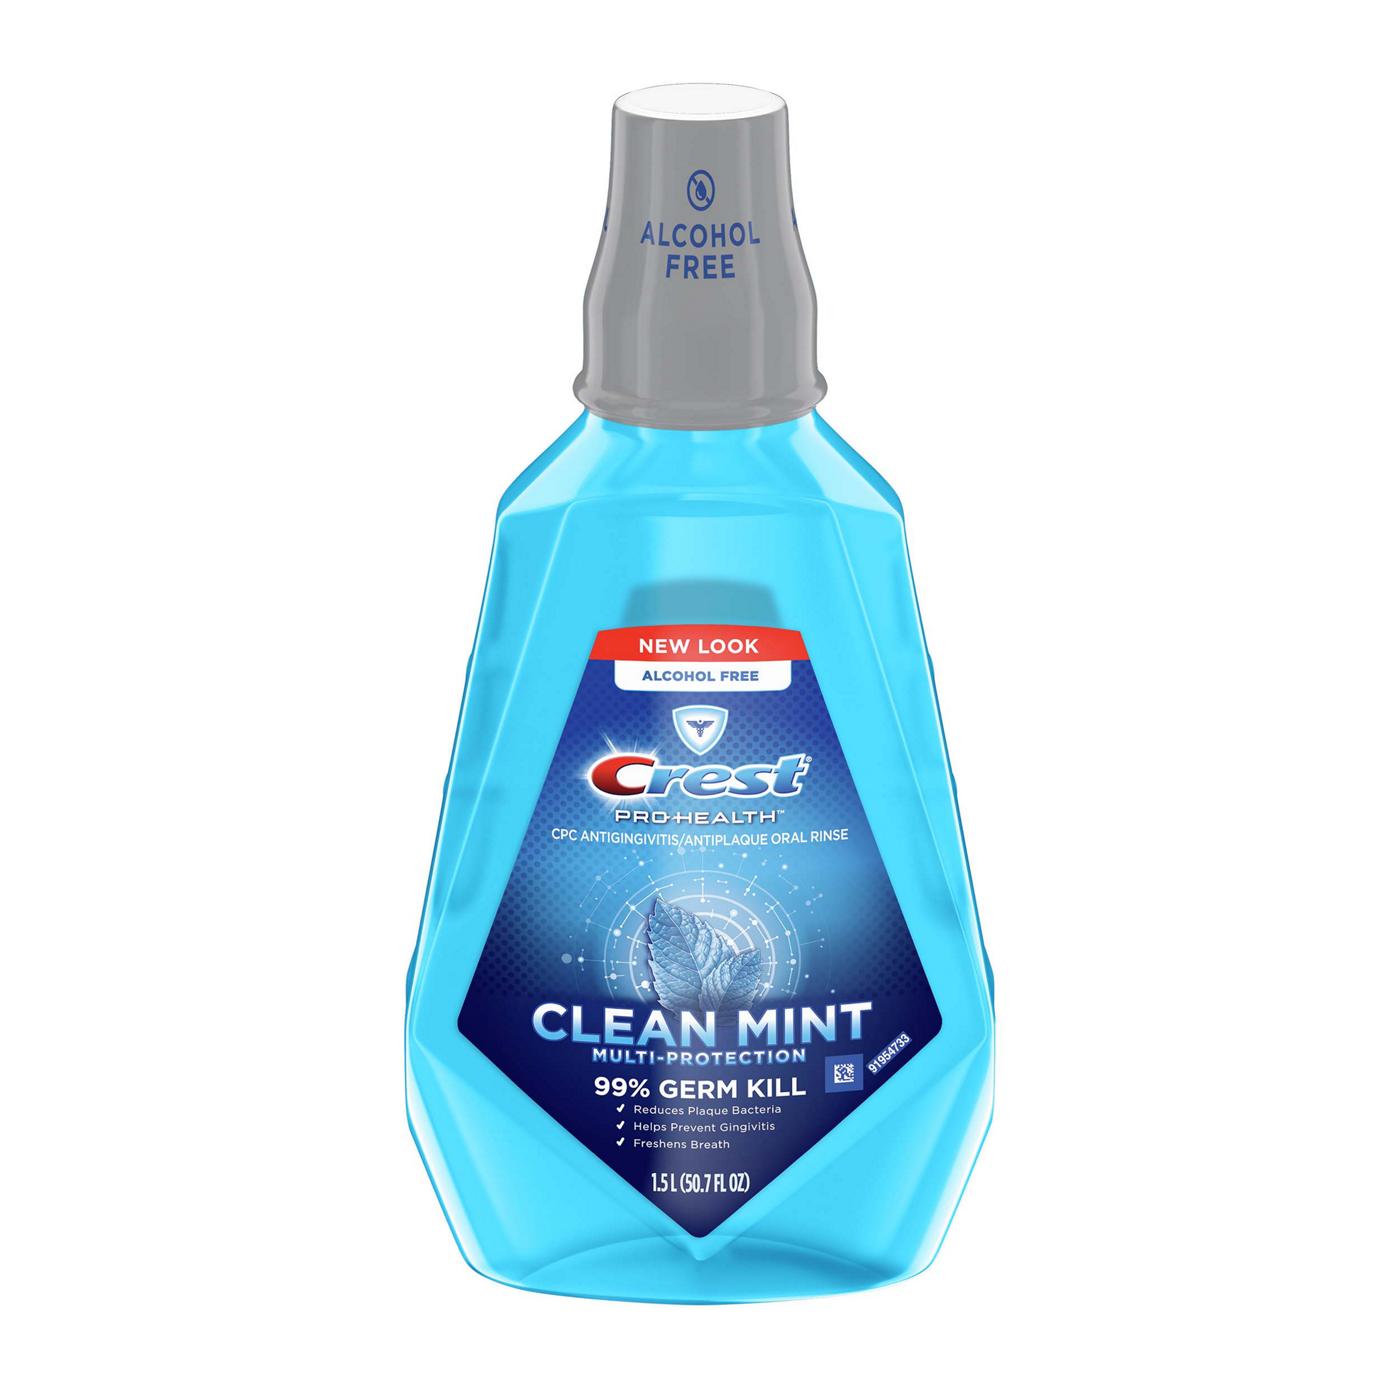 Crest Pro Health Multi-Protection Mouthwash - Clean Mint; image 1 of 5